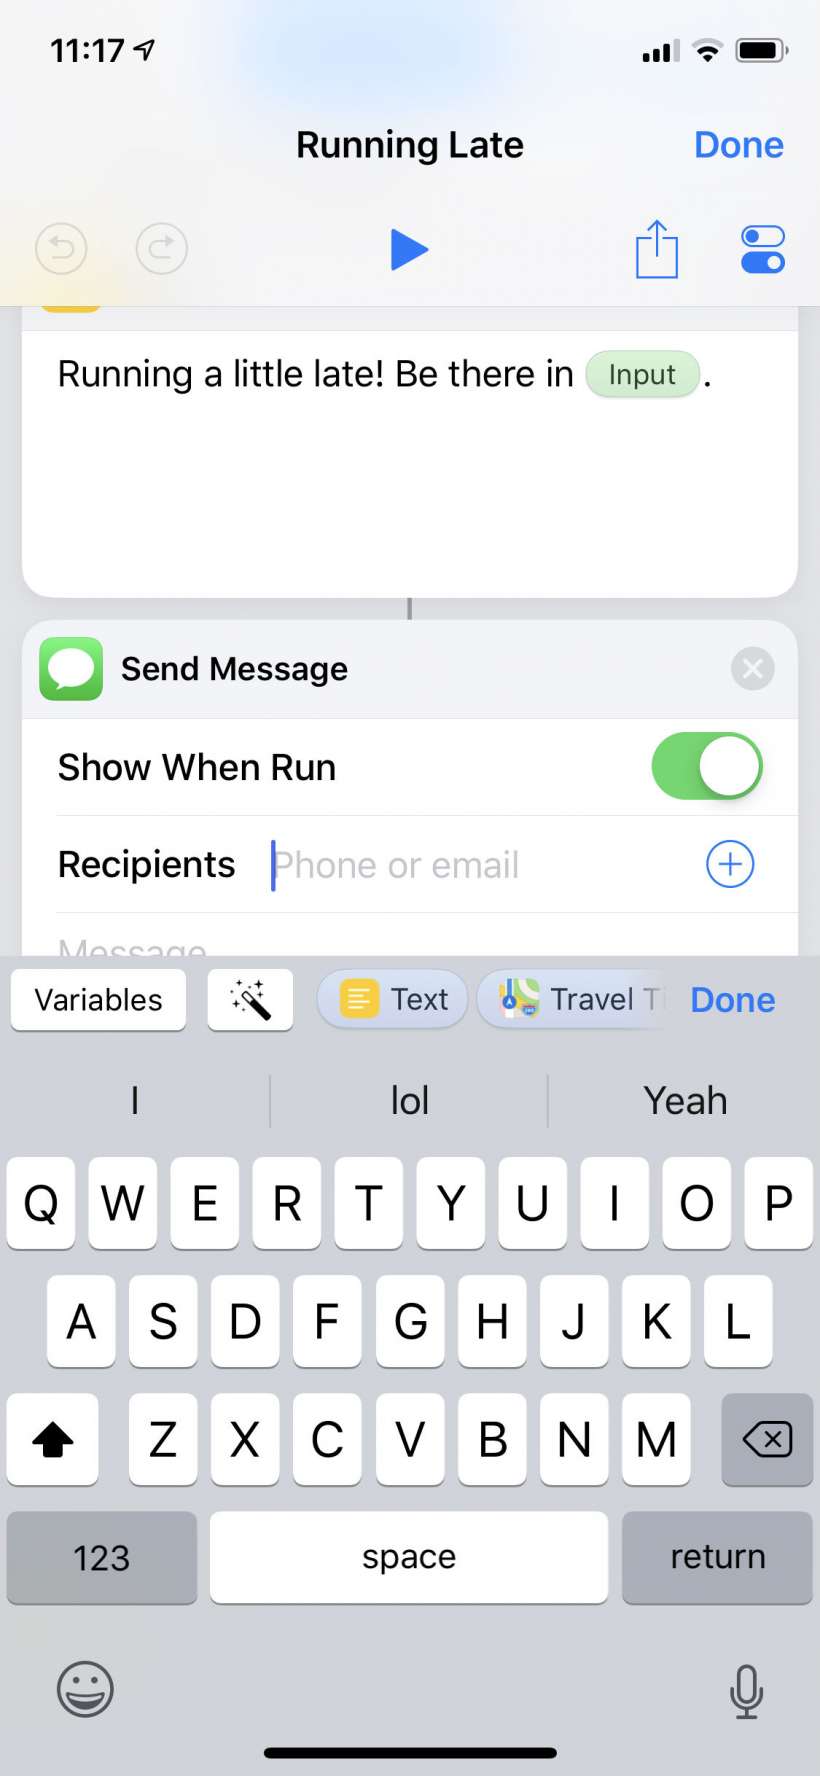 How to change Shortcuts programs on iPhone and iPad.